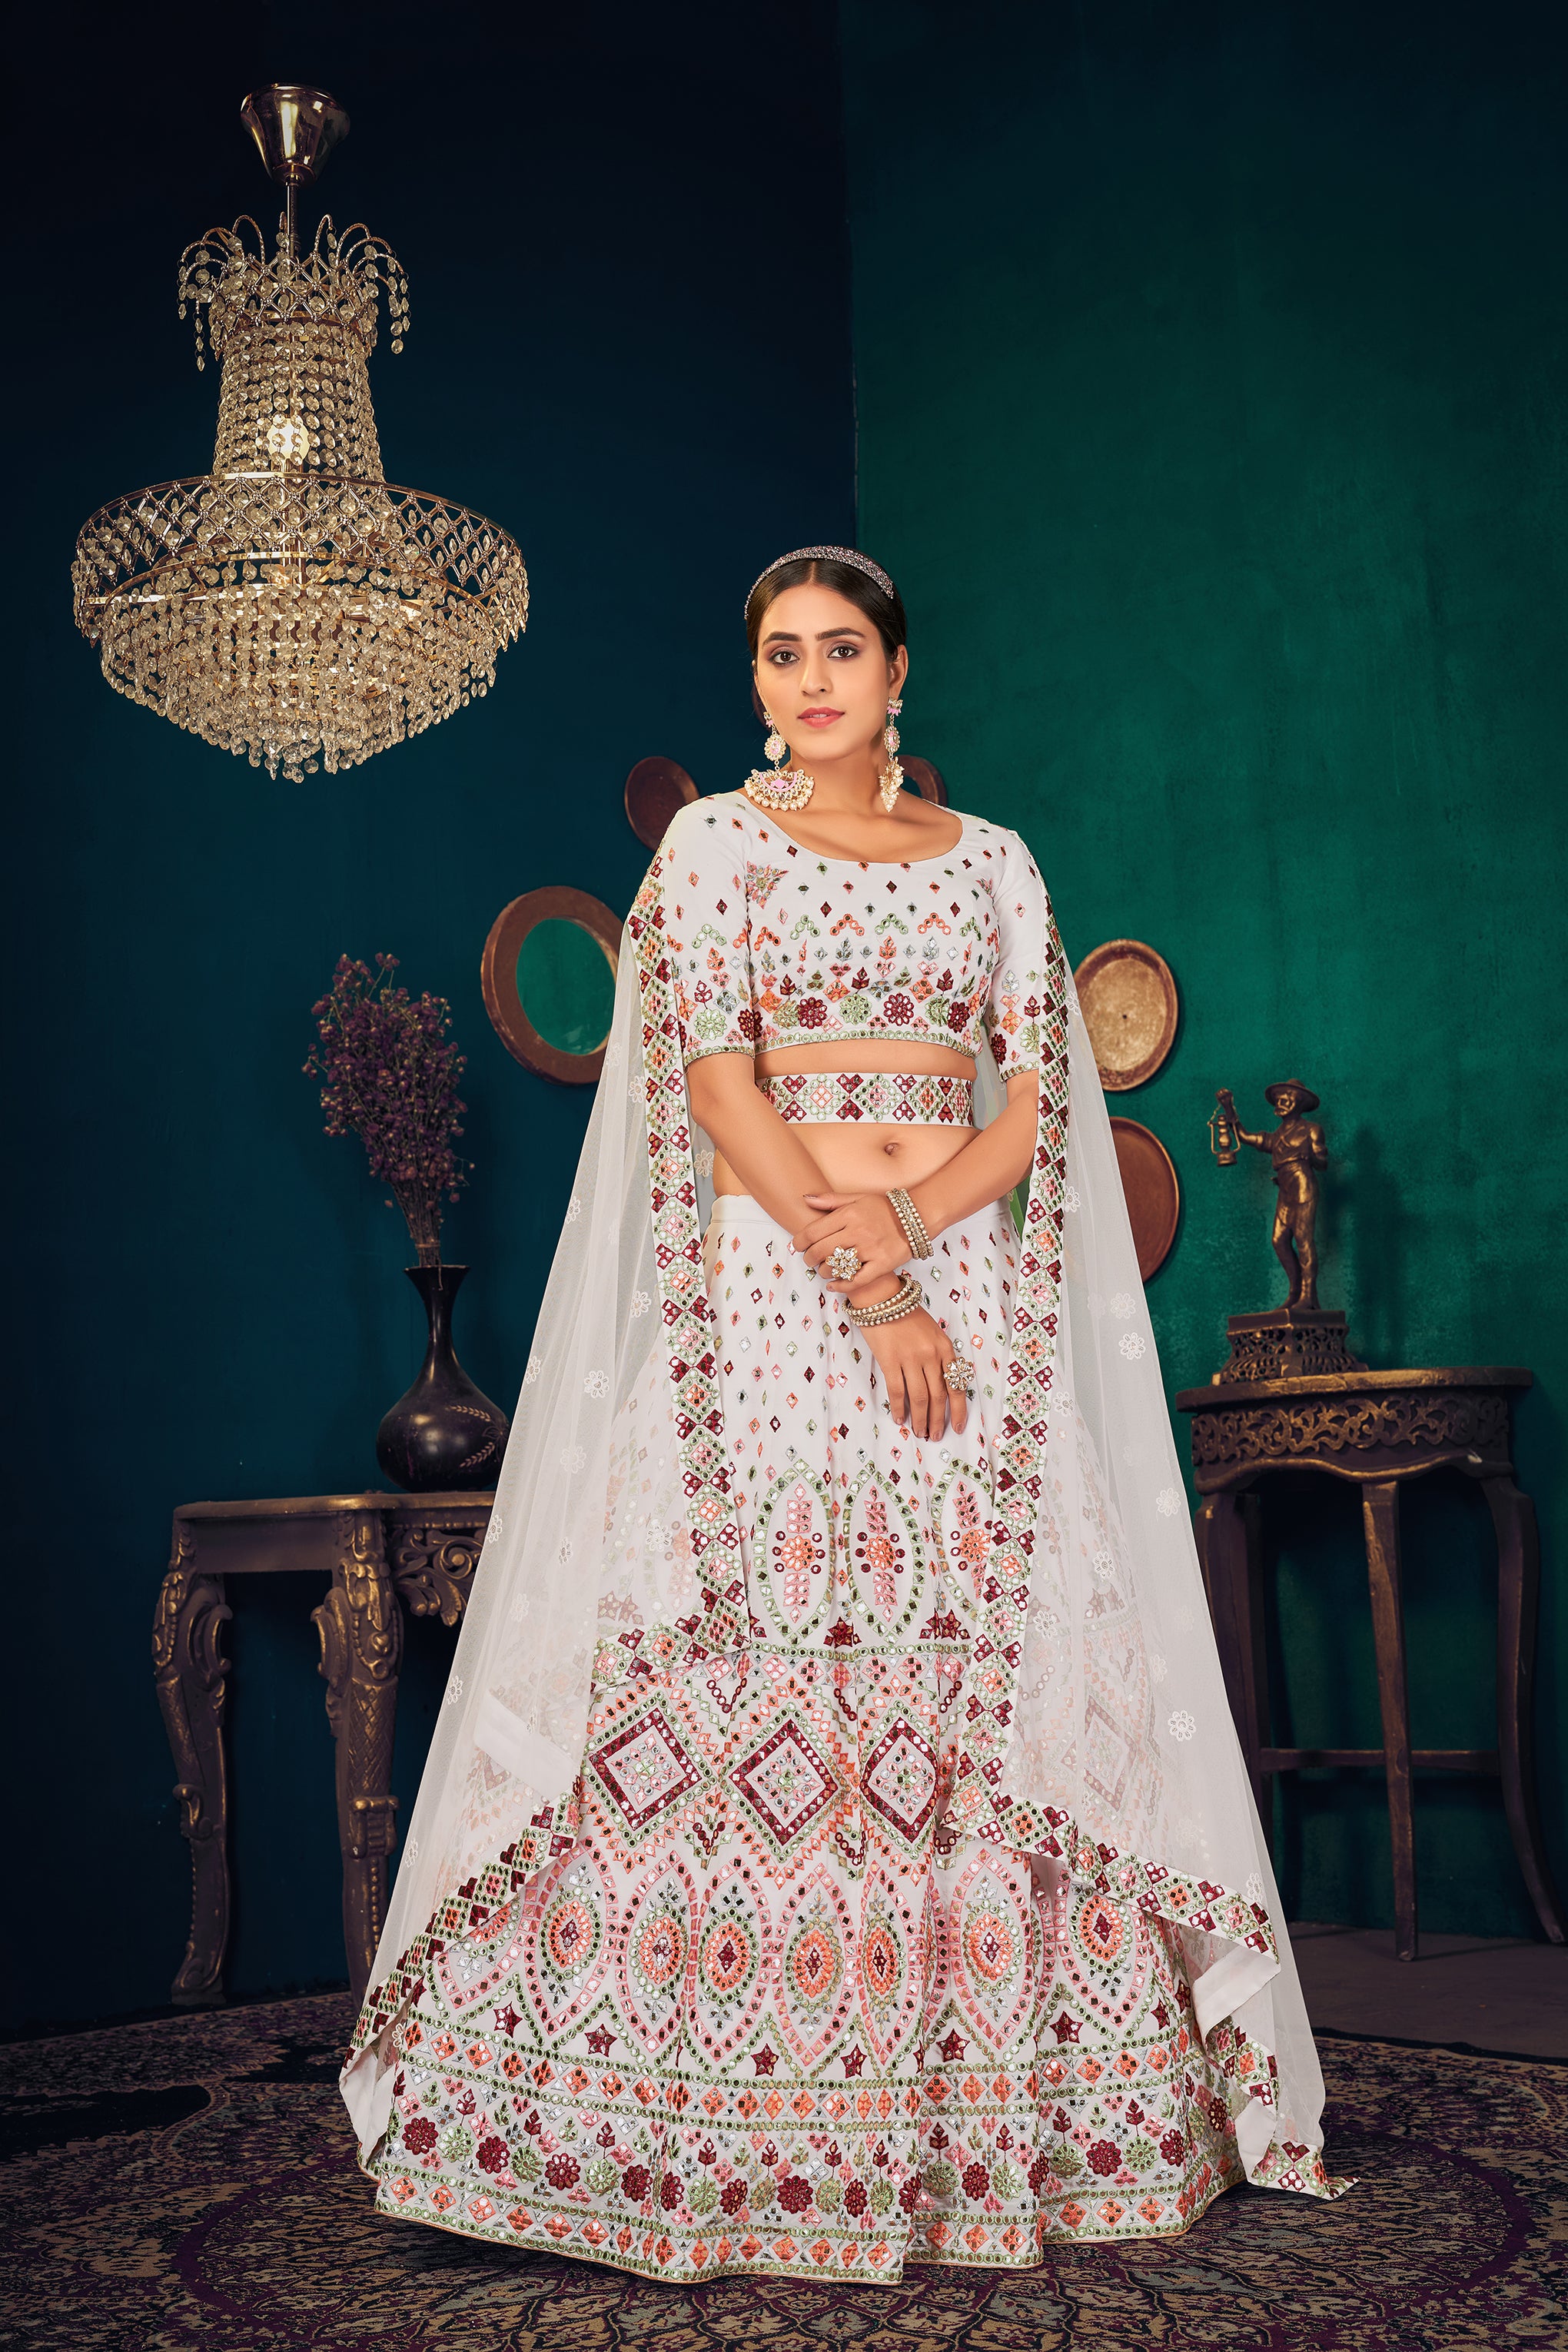 Lehenga Captions For Your Instagram Pictures | Wedding captions for  instagram, Captions for lehenga pictures, Caption for saree